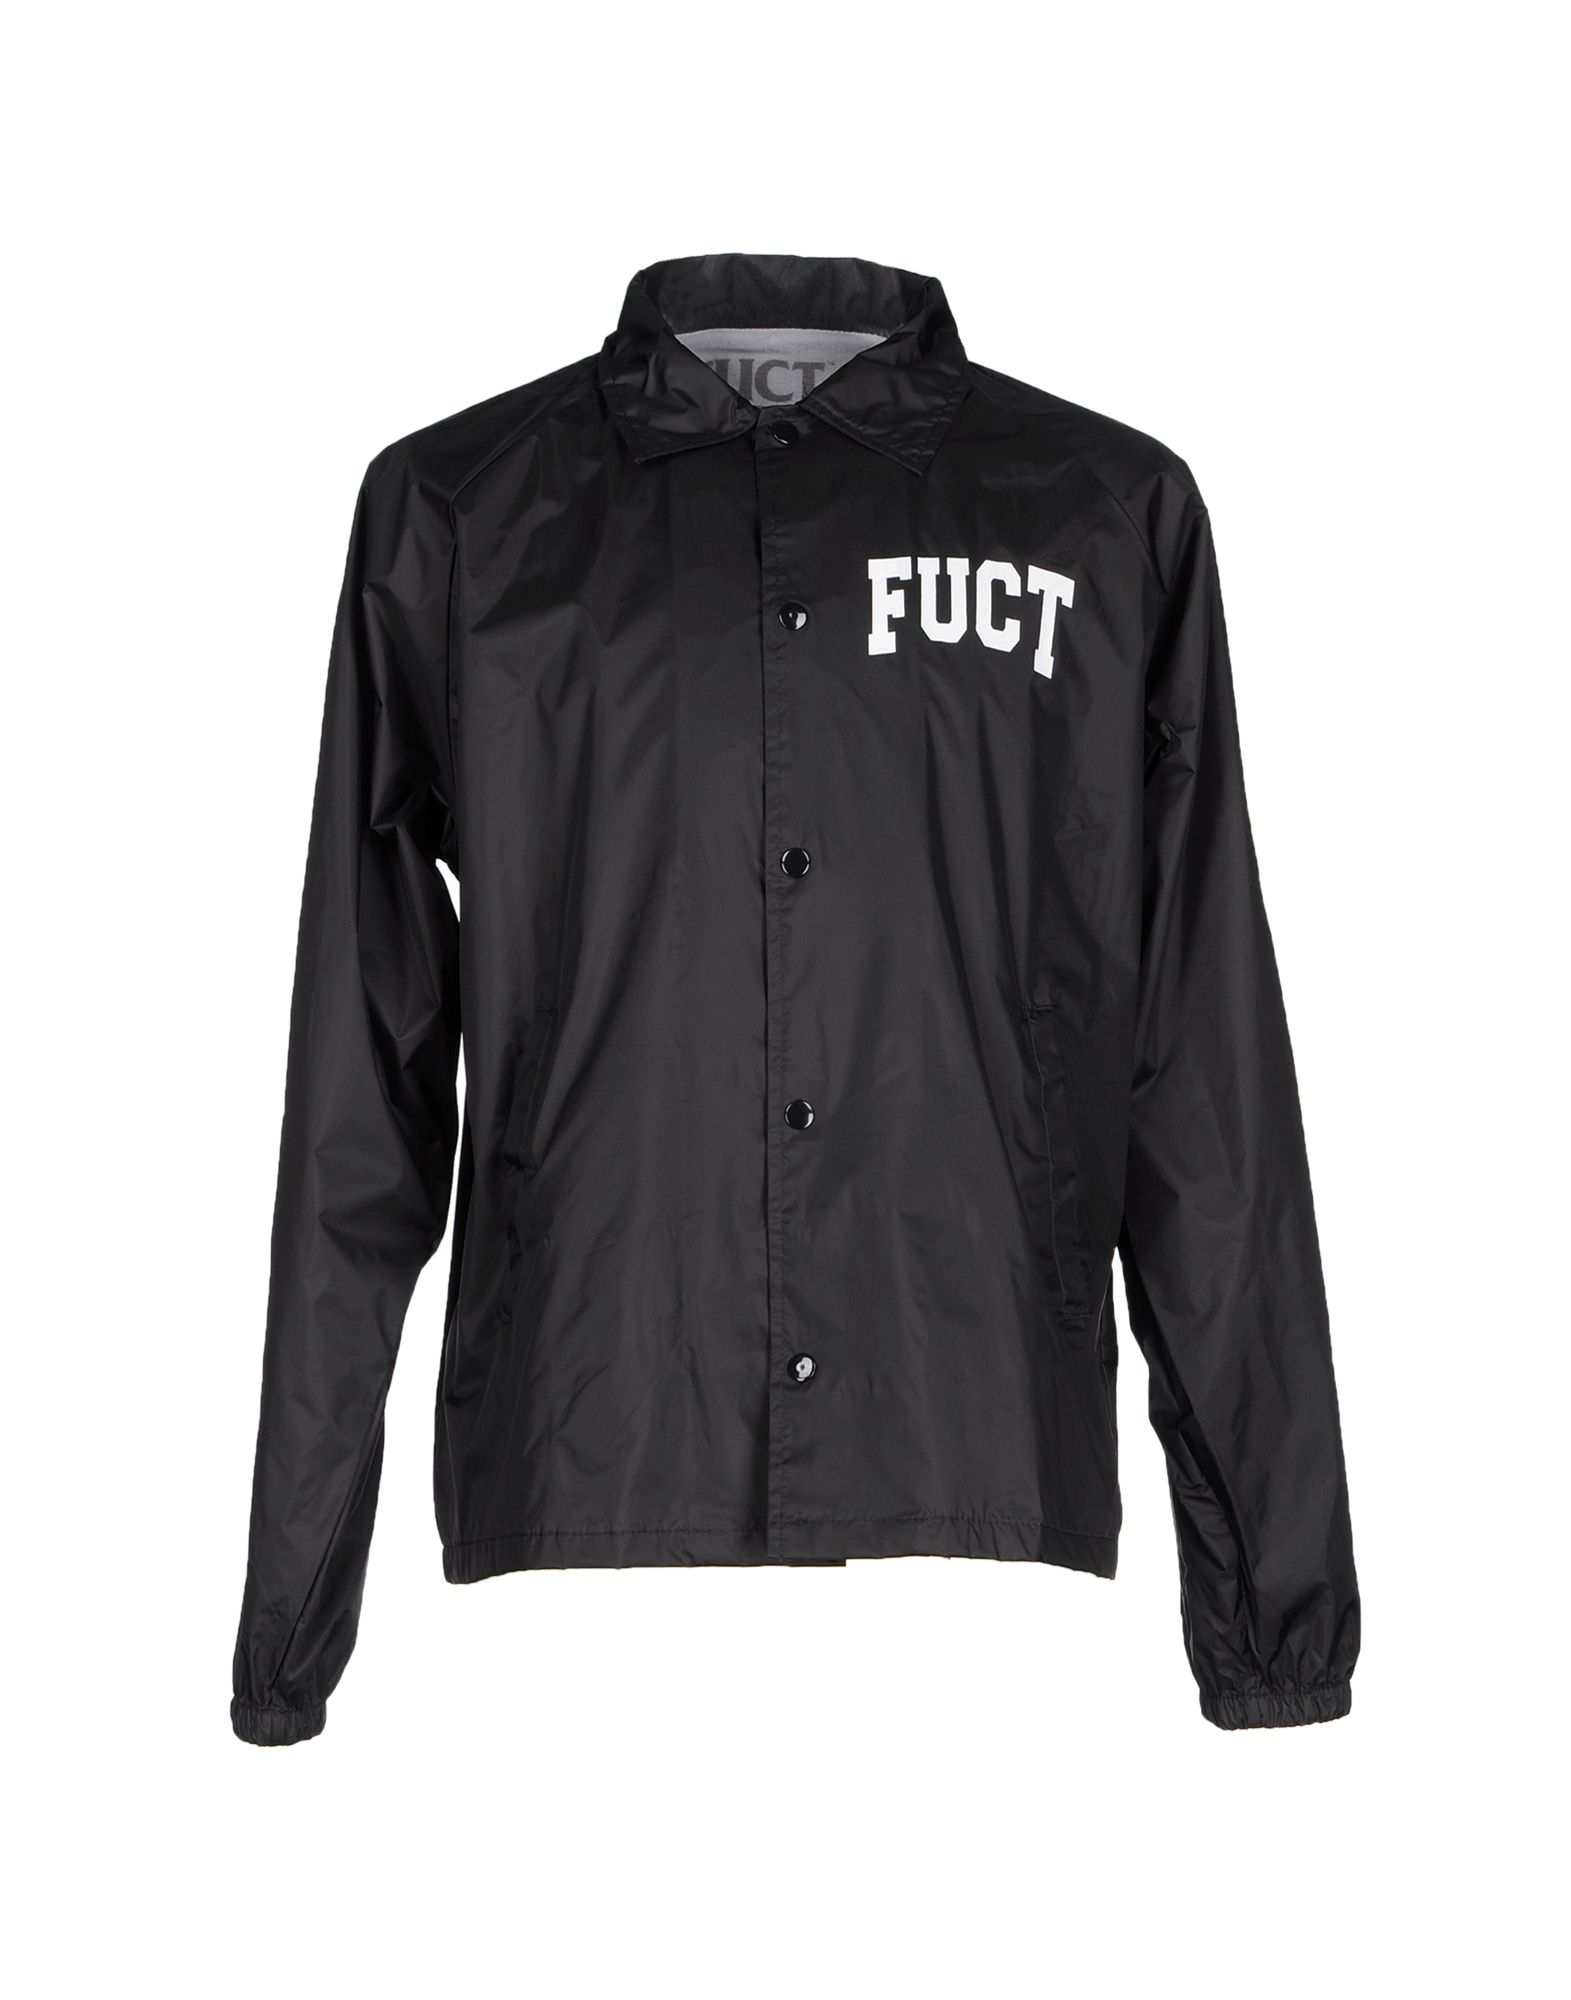 Lyst - Fuct Jacket in Black for Men